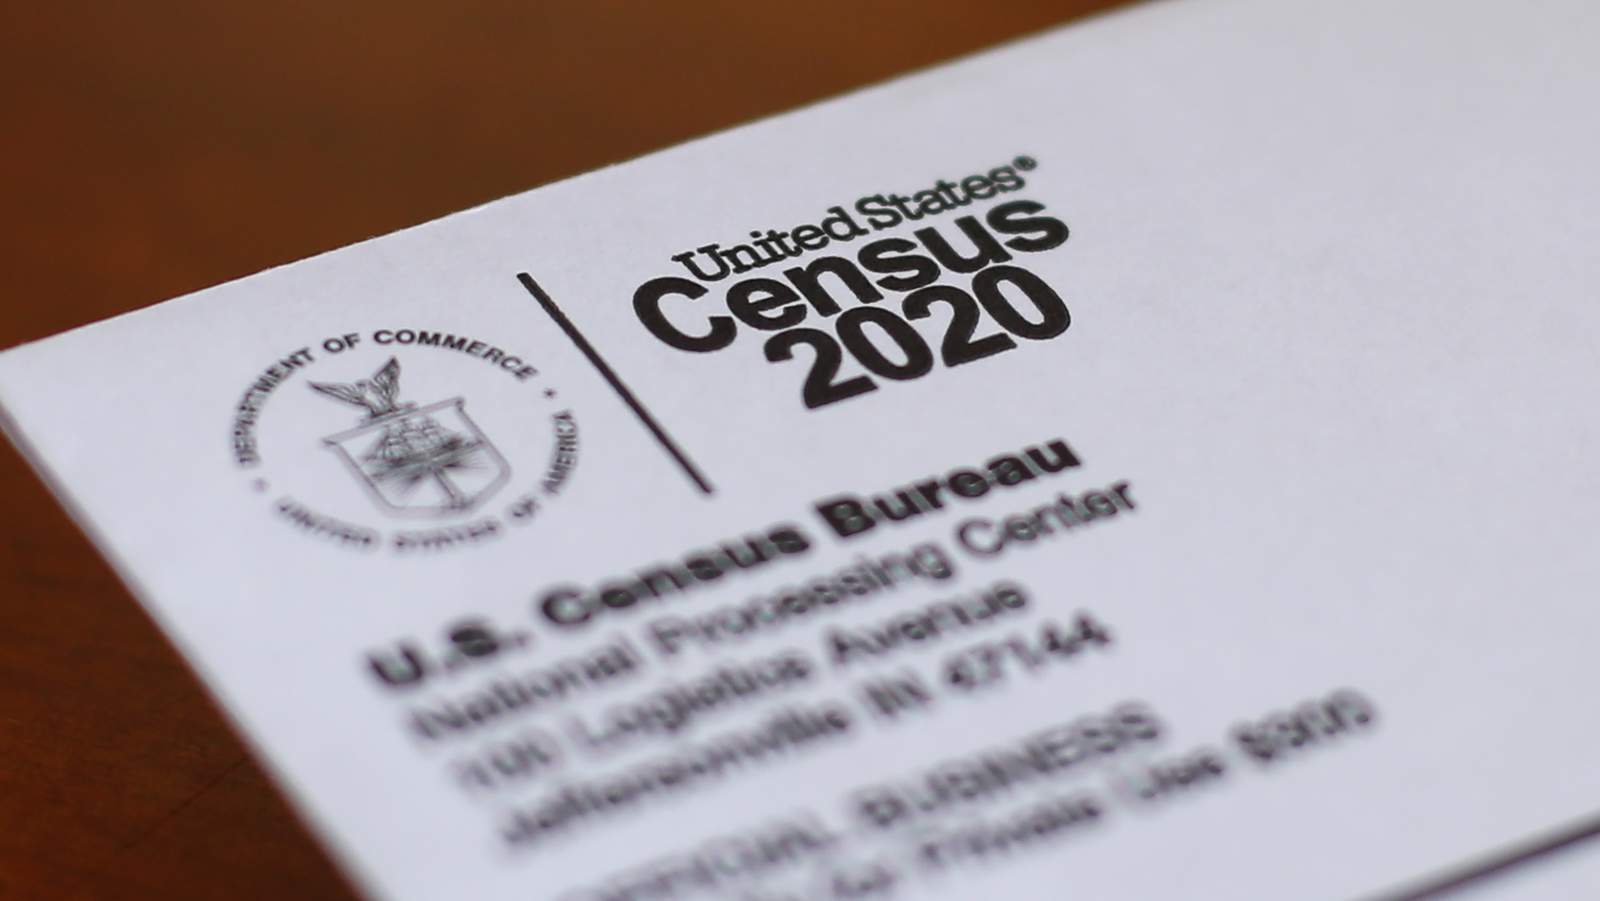 US official: 2020 census to end Oct. 5 despite court order